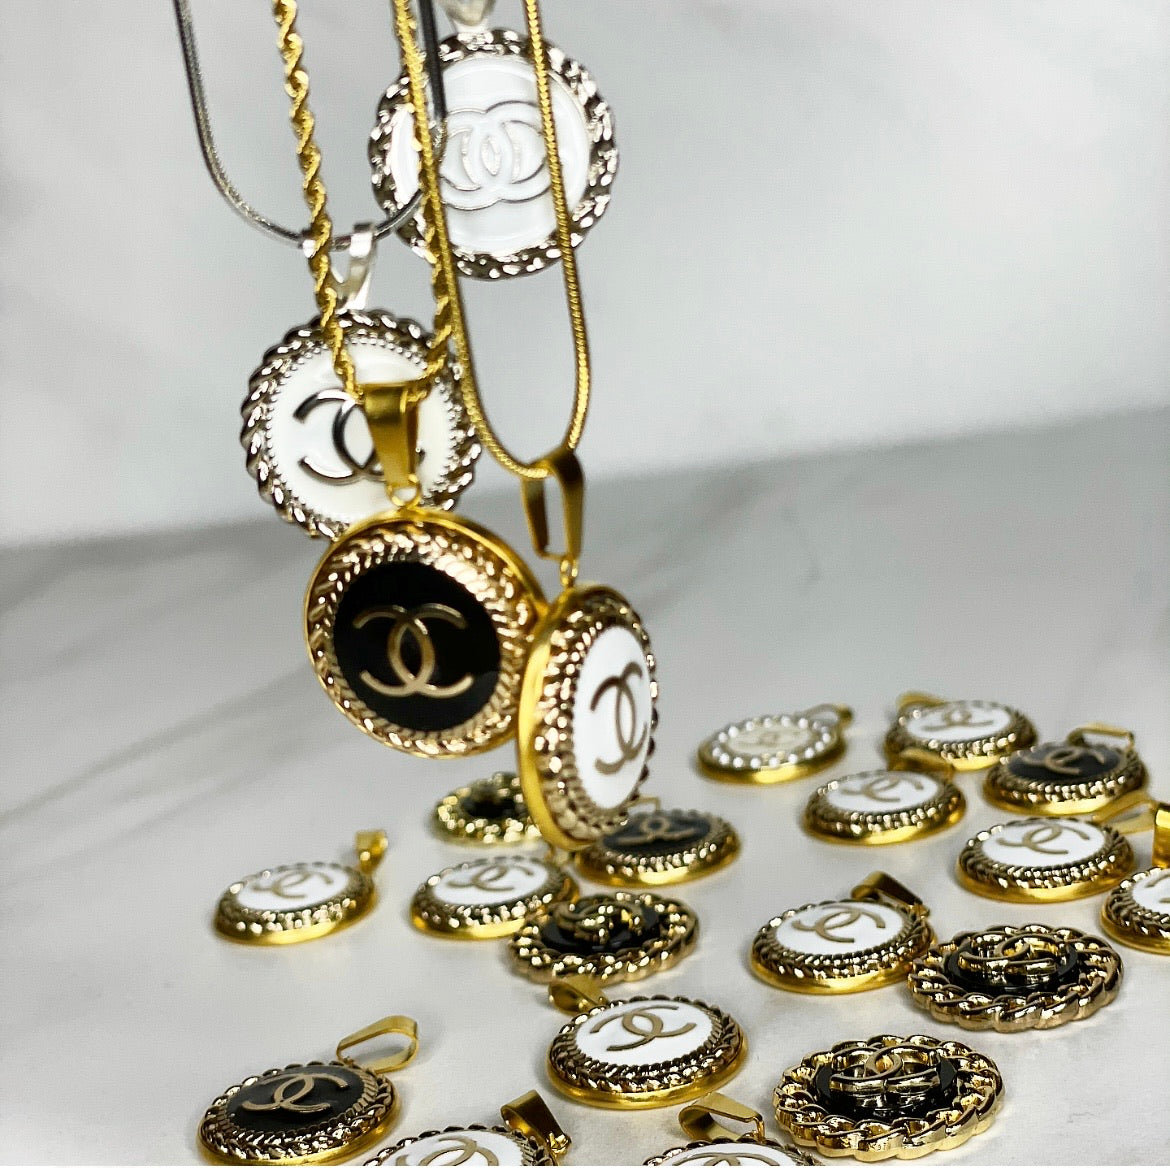 Best Sellers - Repurposed Designer Jewelry including Chanel, Dior